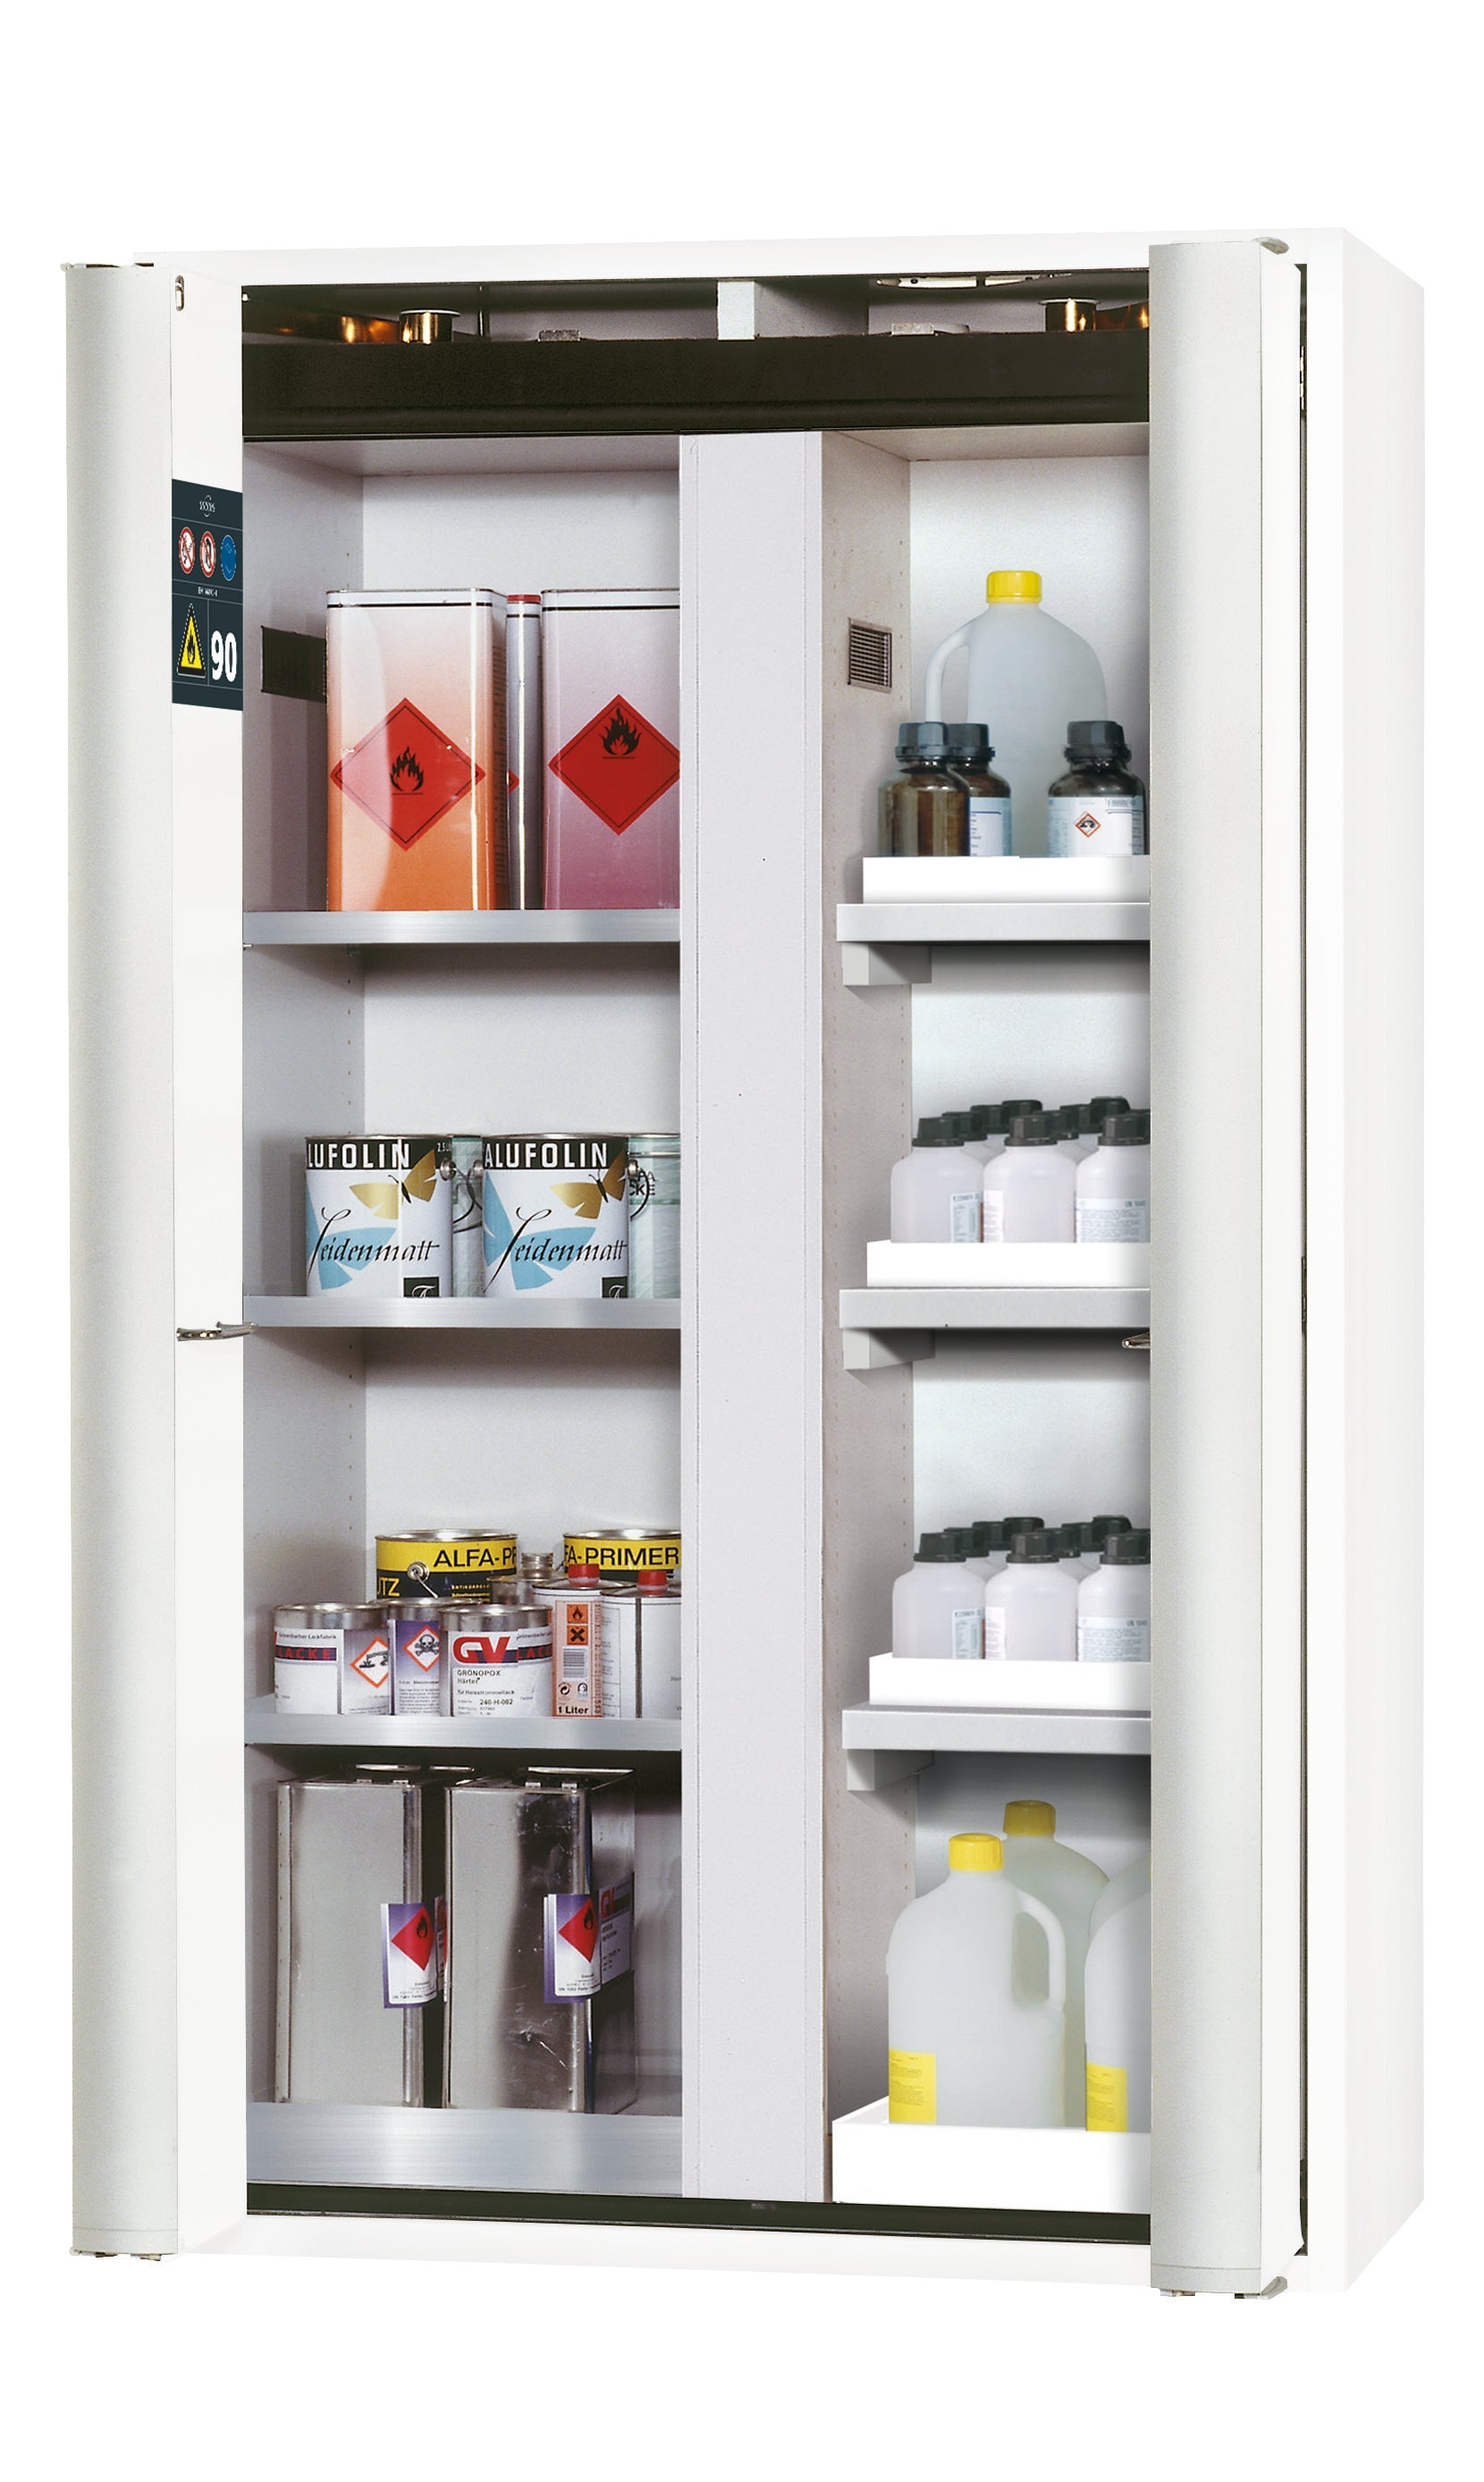 Type 90 safety cabinet S-PHOENIX-90 model S90.196.120.MV.FDAS in laboratory white (similar to RAL 9016) with 3x standard shelves (stainless steel 1.4301)